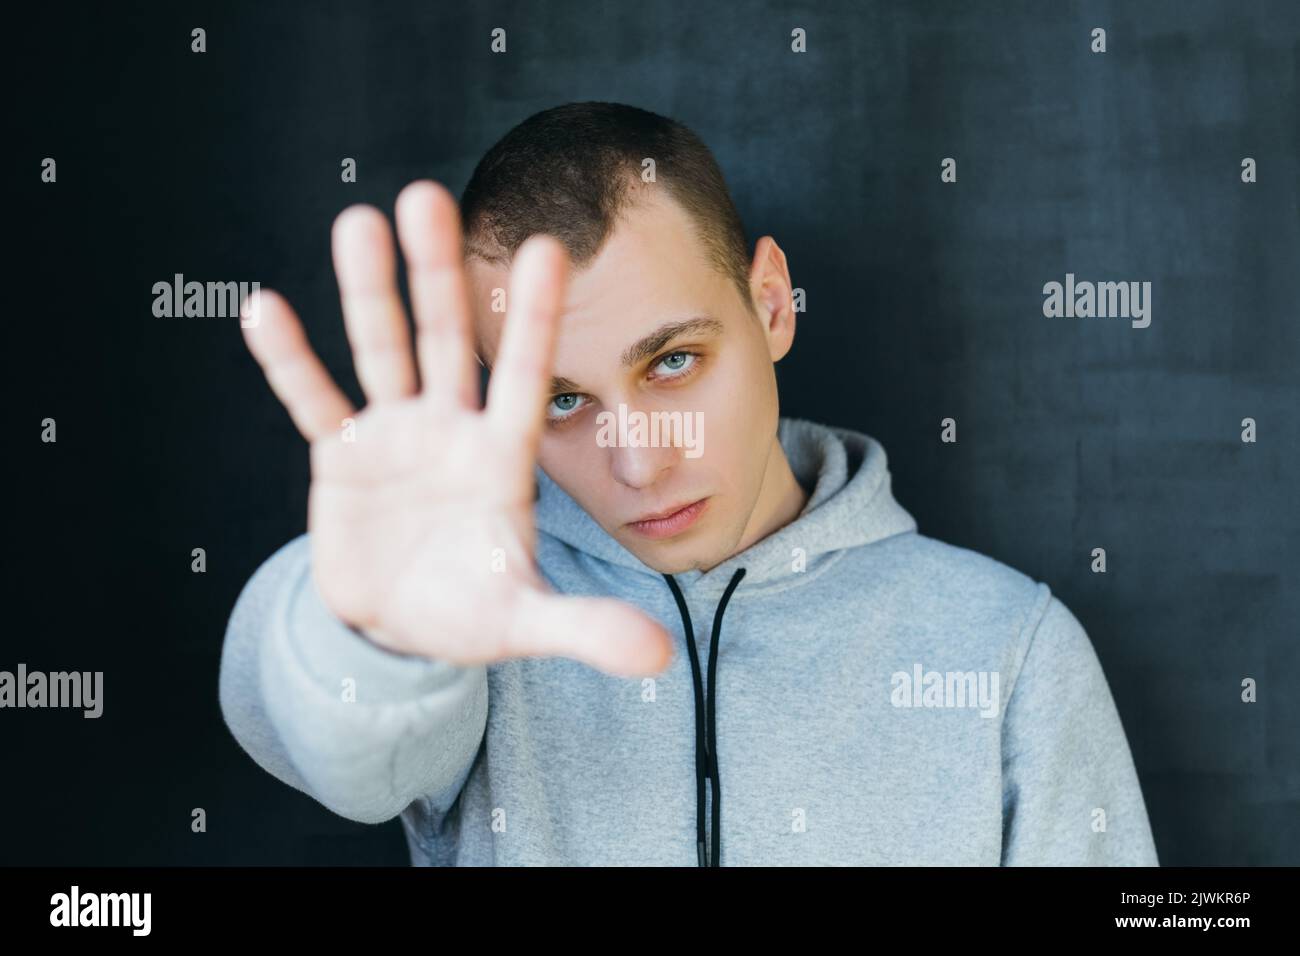 enough handsome guy stop gesture personal privacy Stock Photo